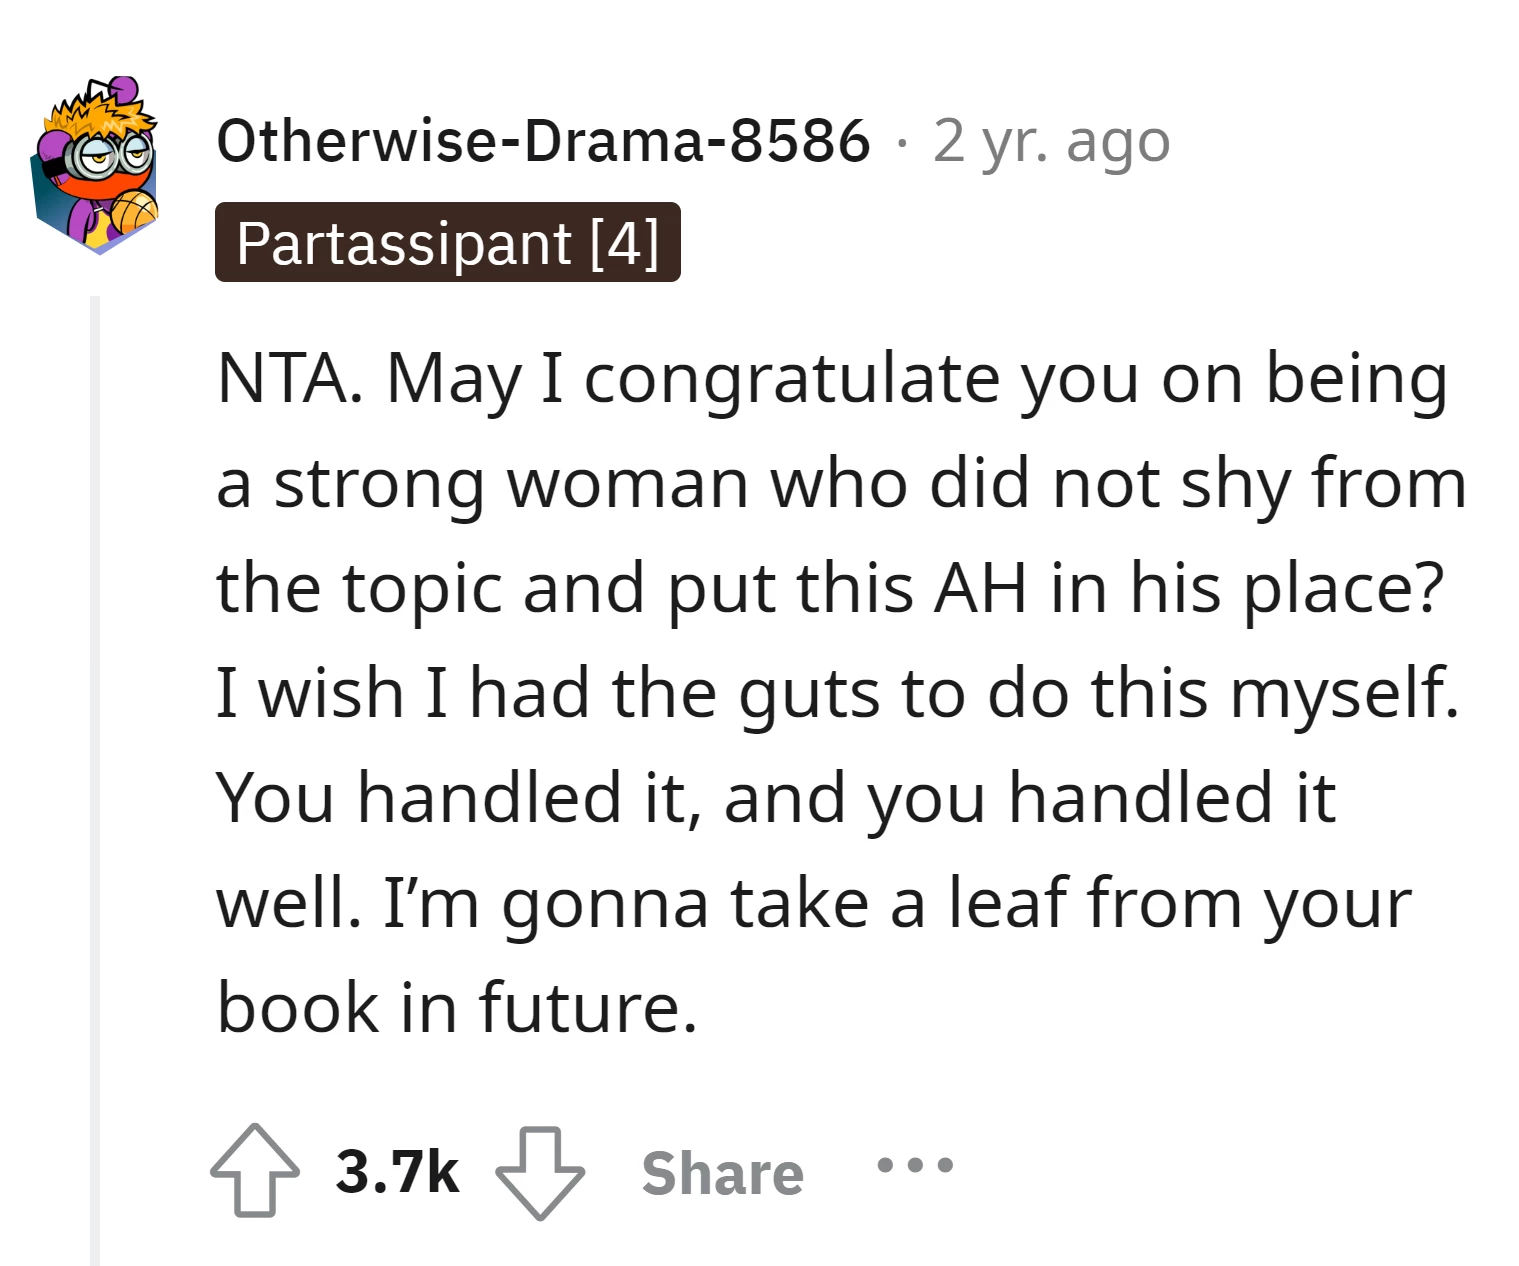 Commenter commends the OP for bravely addressing the inappropriate behavior